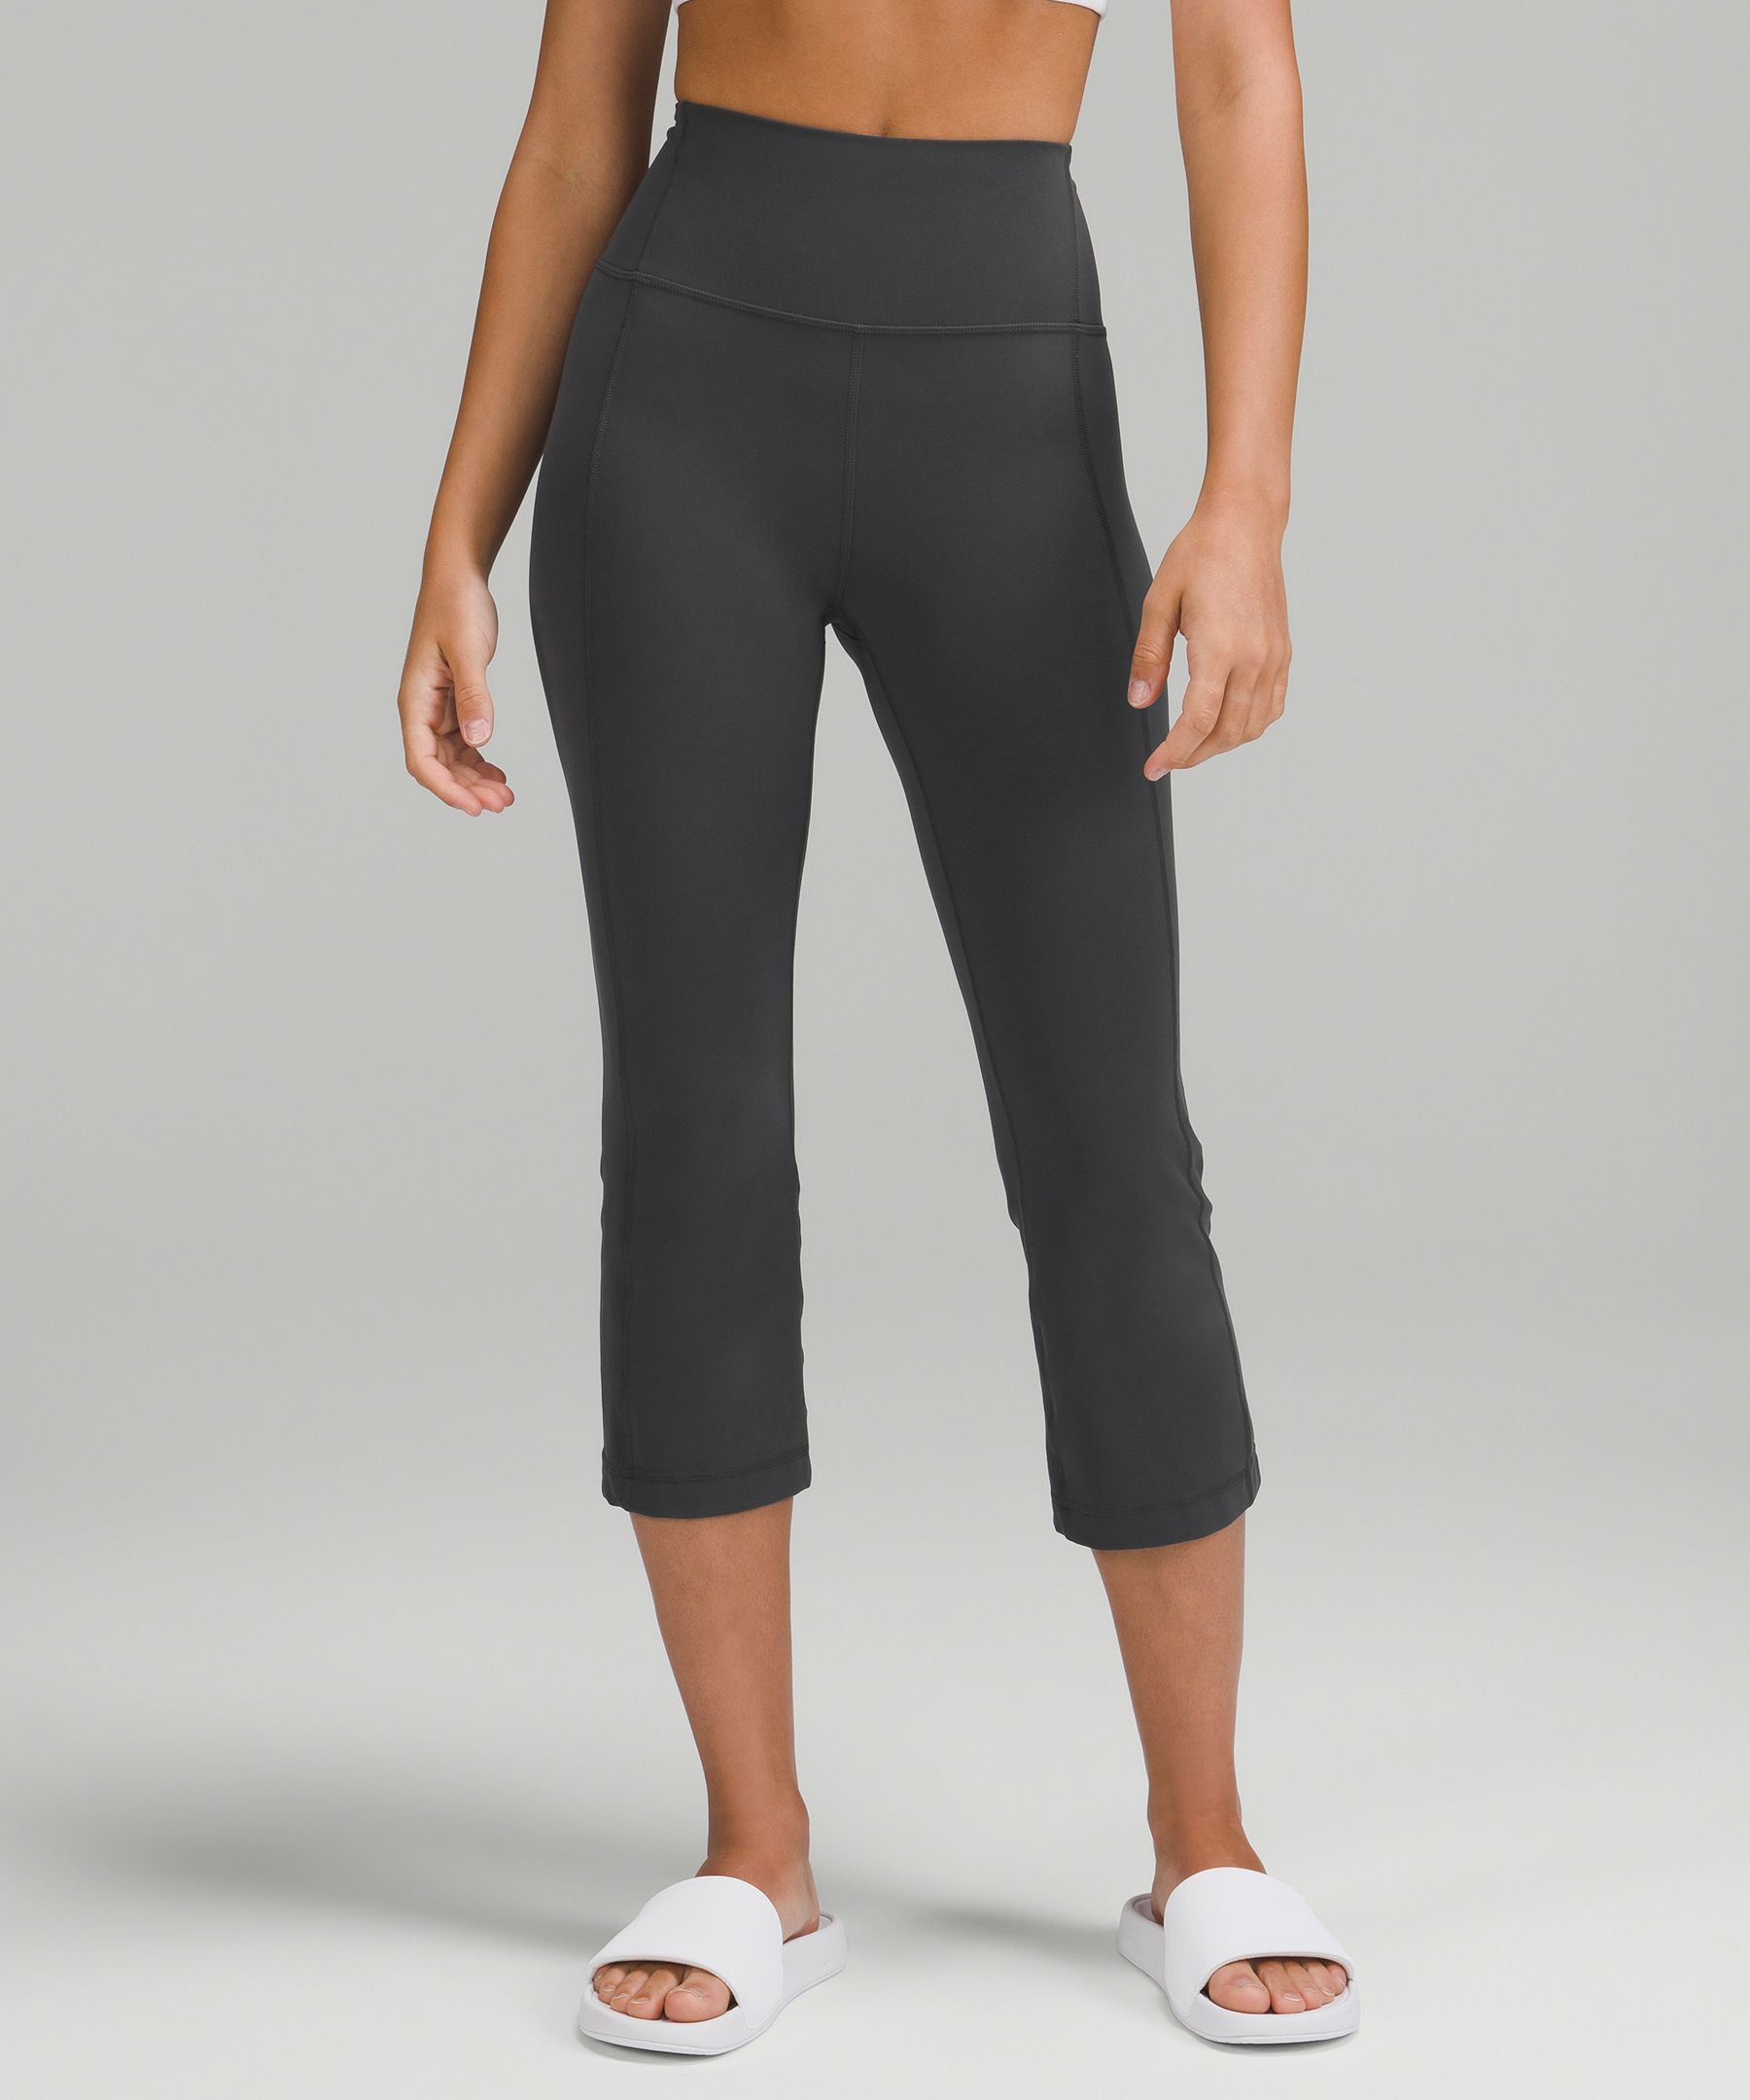 Lululemon athletica Throwback Gather and Crow High-Rise Crop 21, Women's  Pants